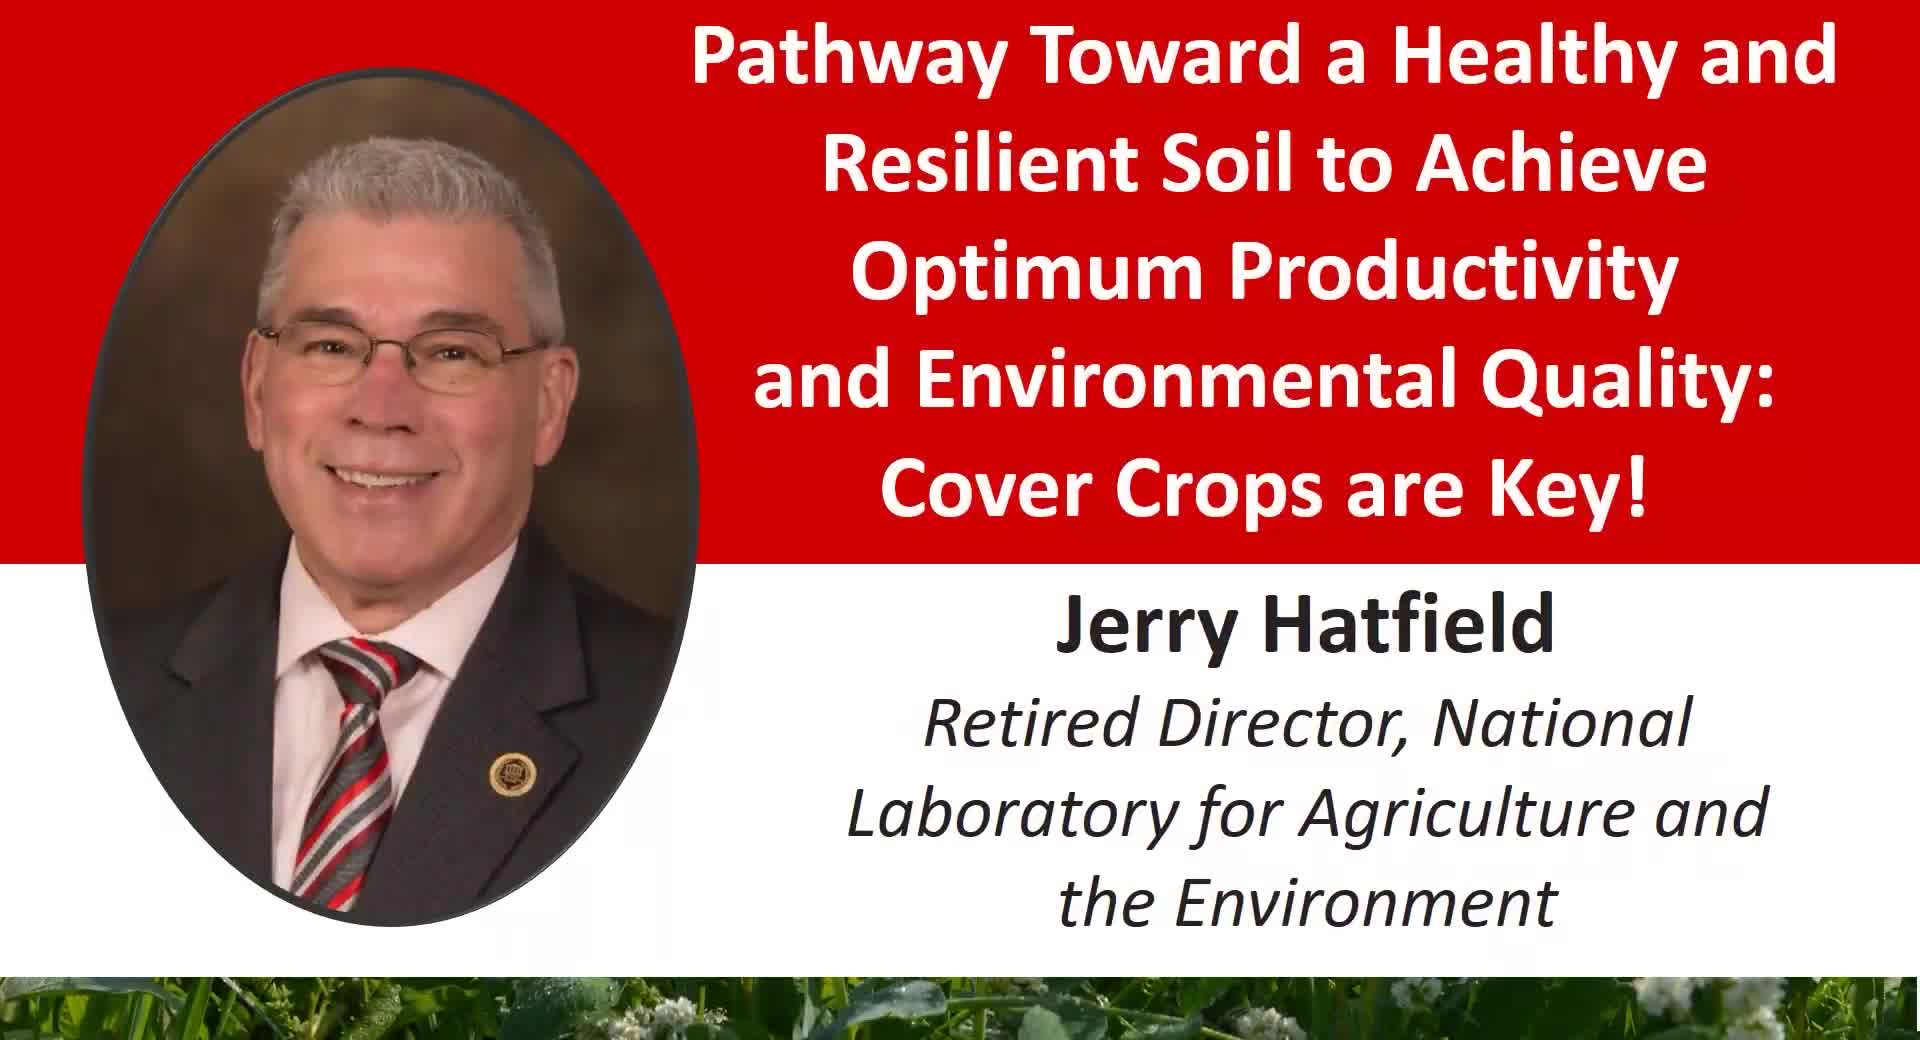 2021 Nebraska Cover Crop and Soil Health Conference - Jerry Hatfield